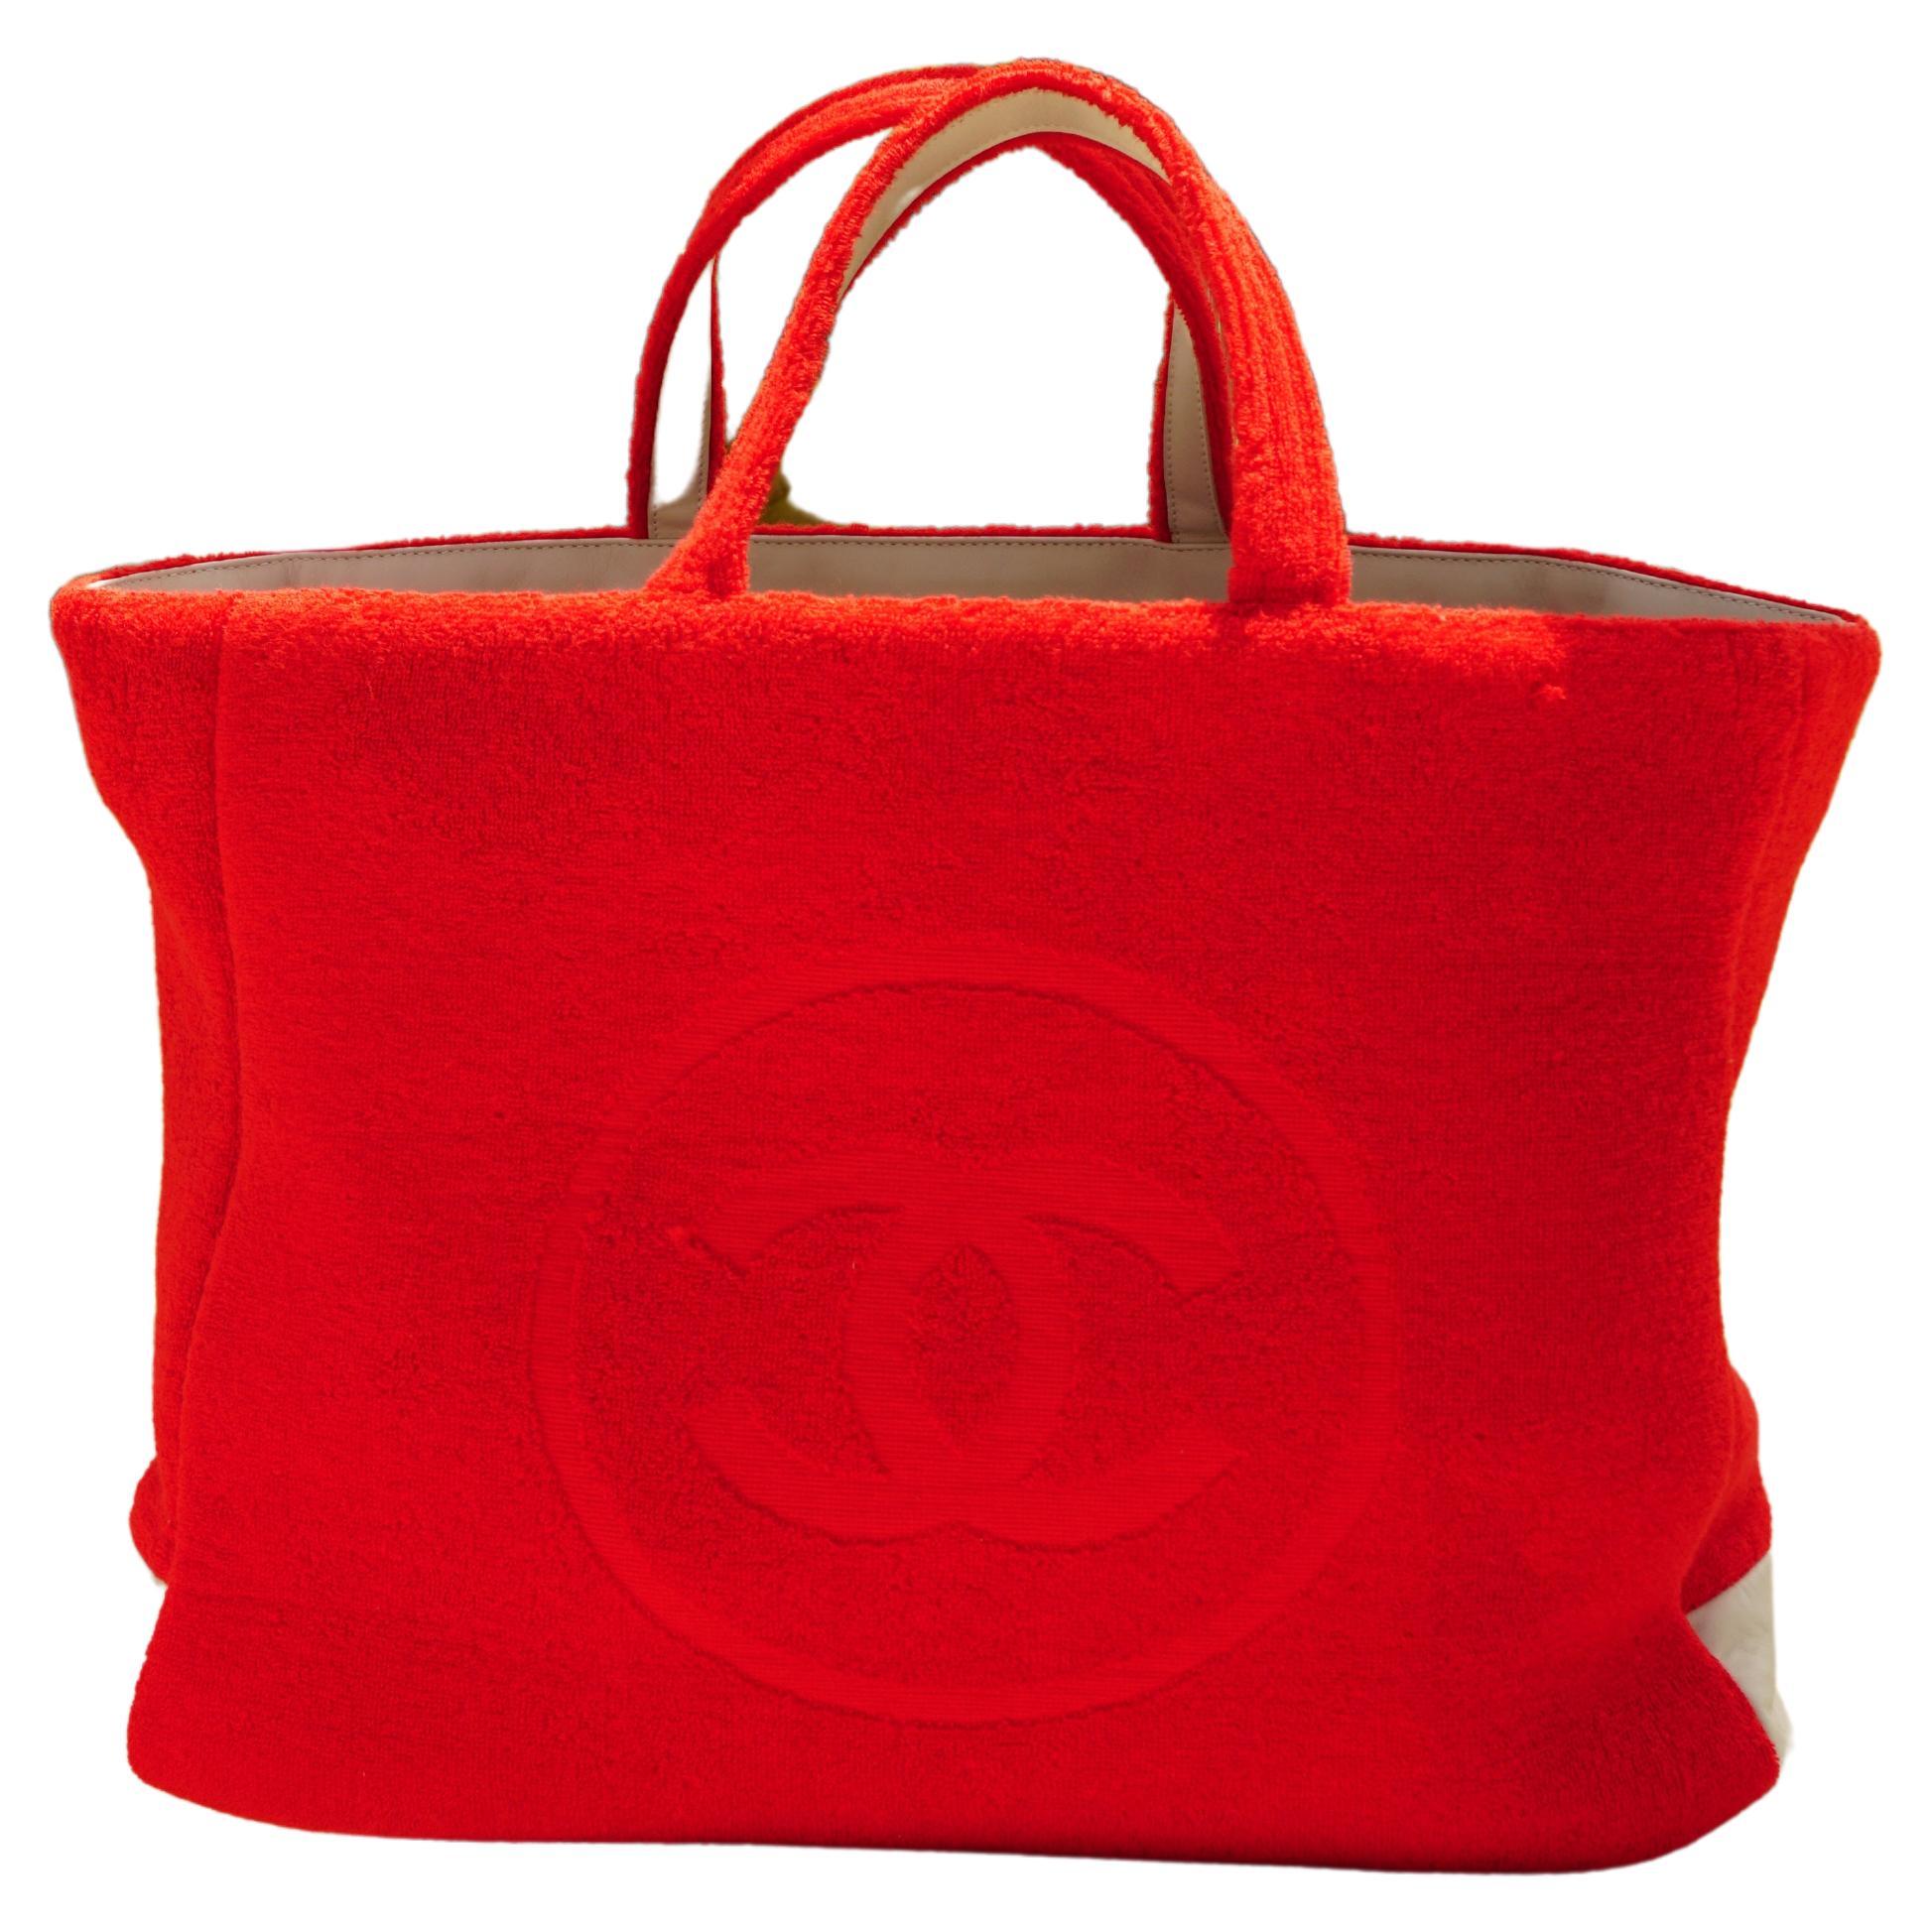 Chanel Vintage Jumbo Large CC Reversible Multicolor Lego Two Tone Red Beach Tote In Good Condition For Sale In Miami, FL